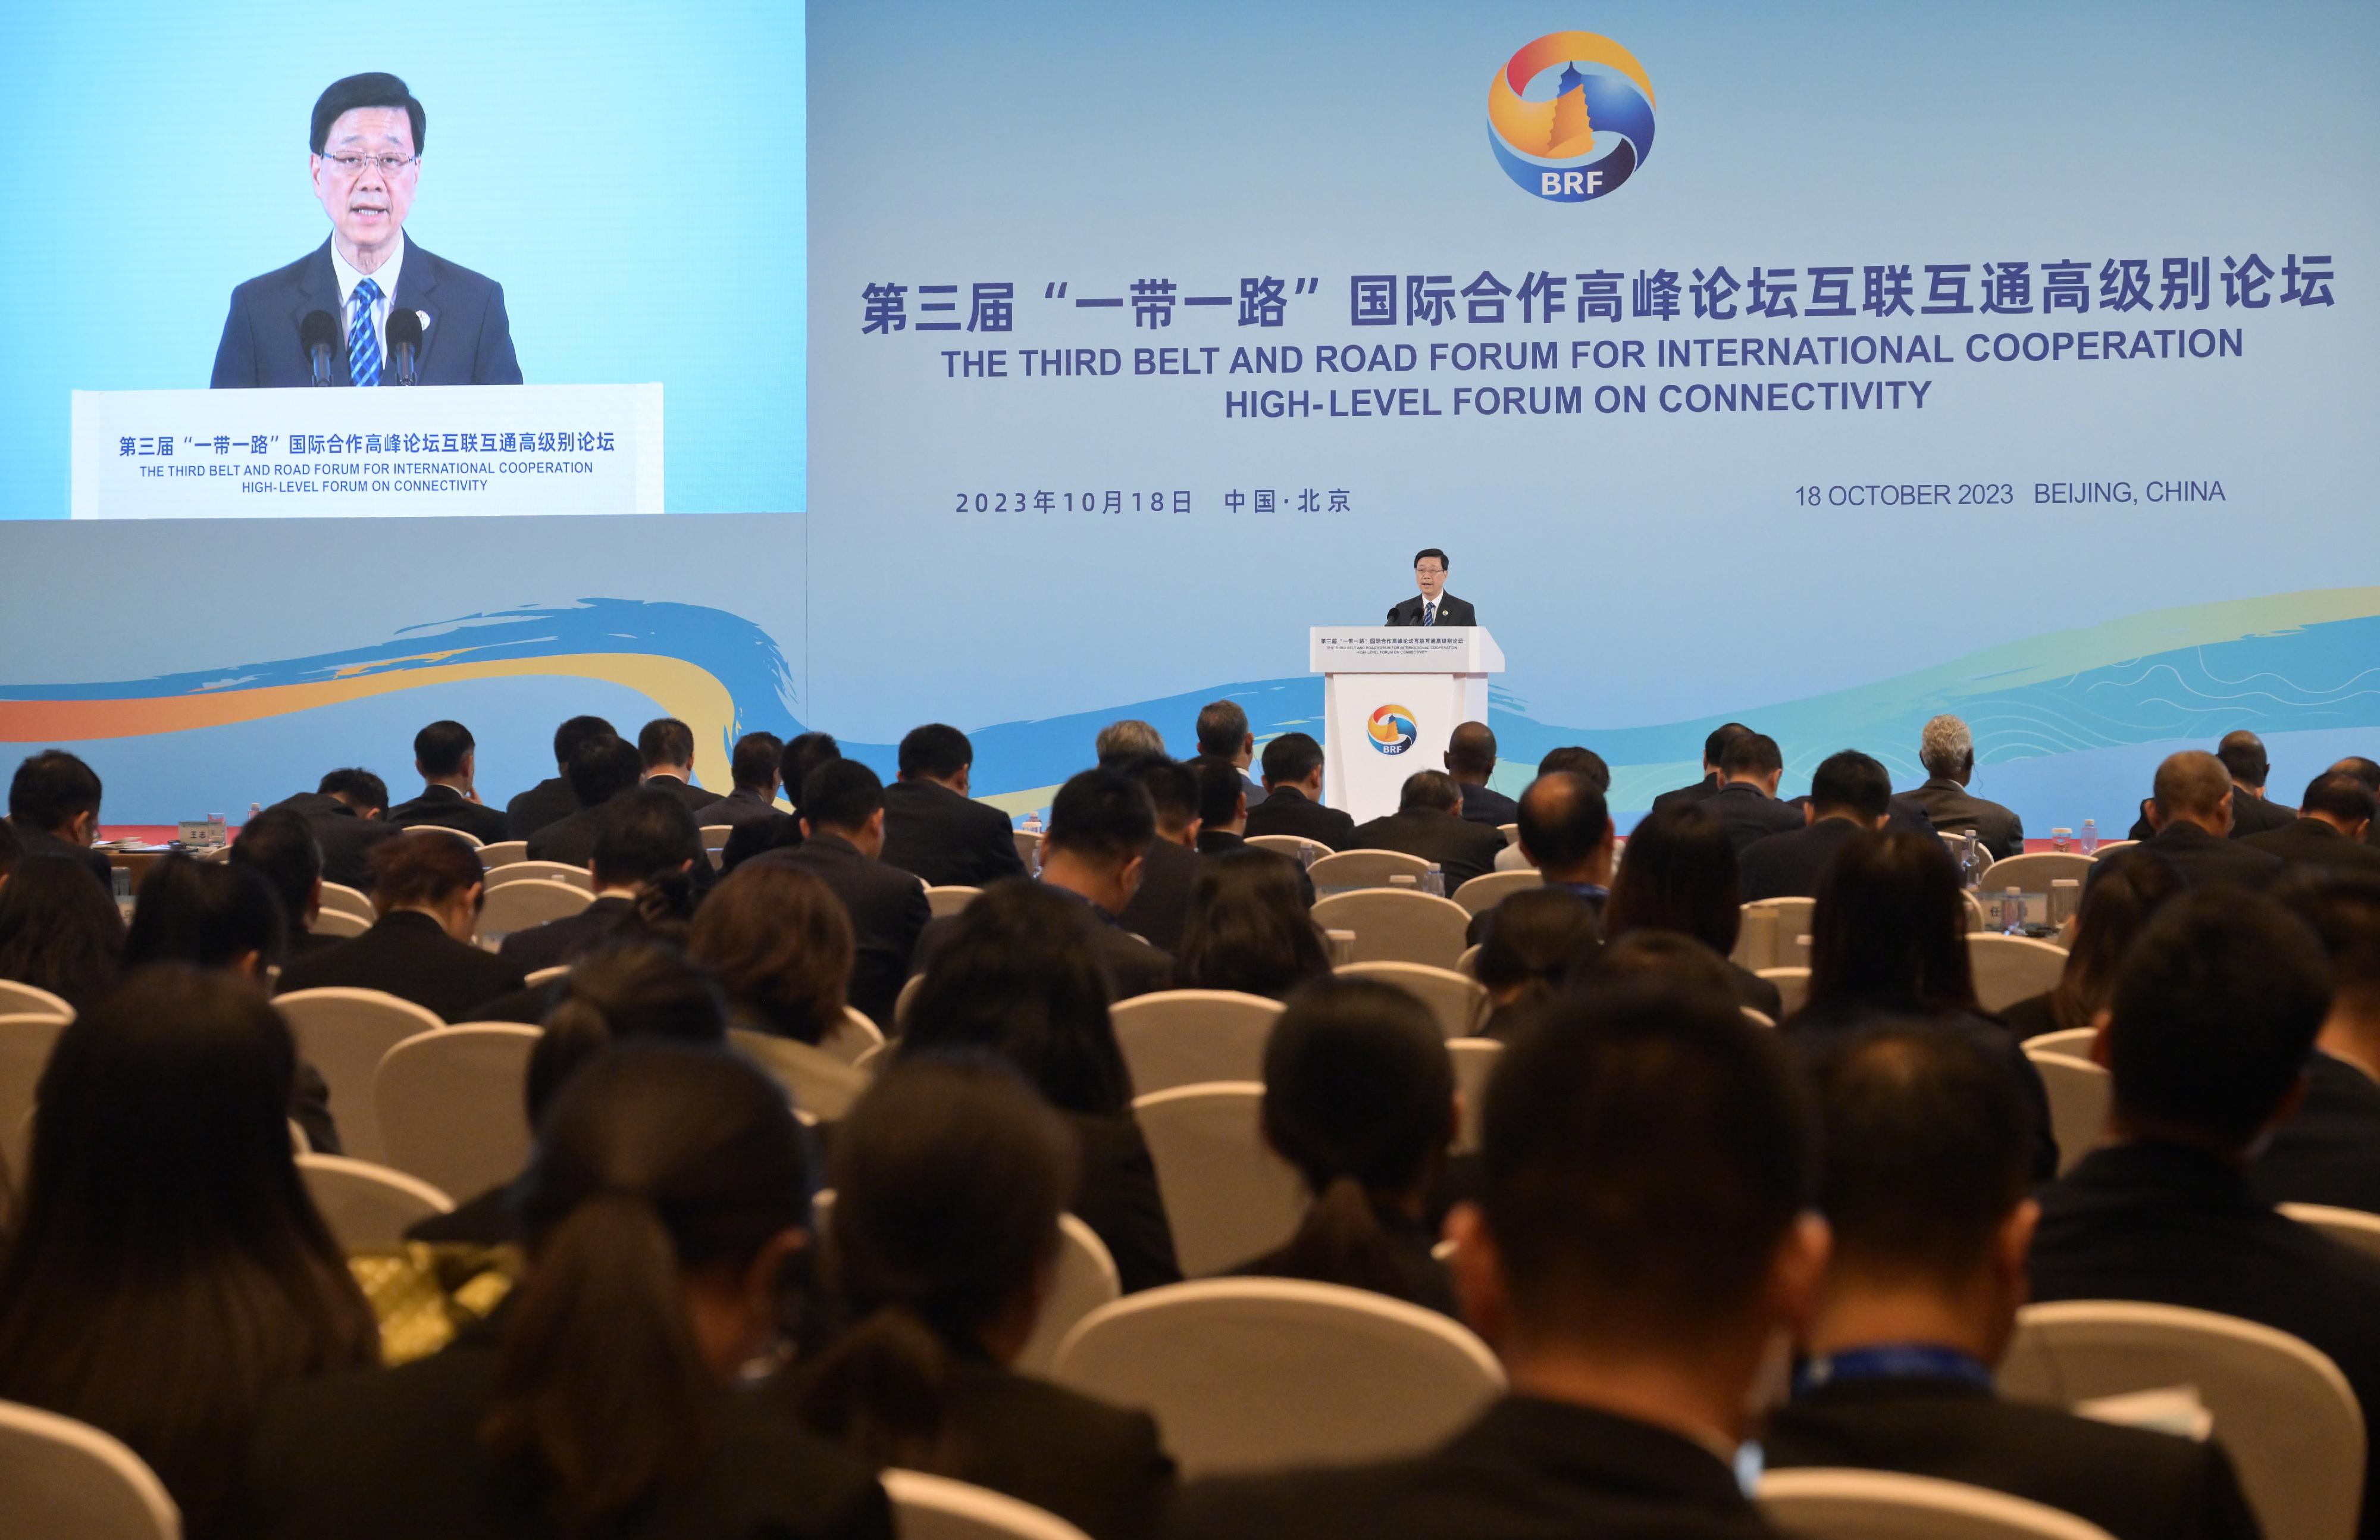 The Chief Executive, Mr John Lee, led a high-level Hong Kong Special Administrative Region delegation comprising senior government officials and members of various sectors to participate in the third Belt and Road Forum for International Cooperation in Beijing today (October 18).  Photo shows Mr Lee speaking at the High-level Forum on Connectivity.